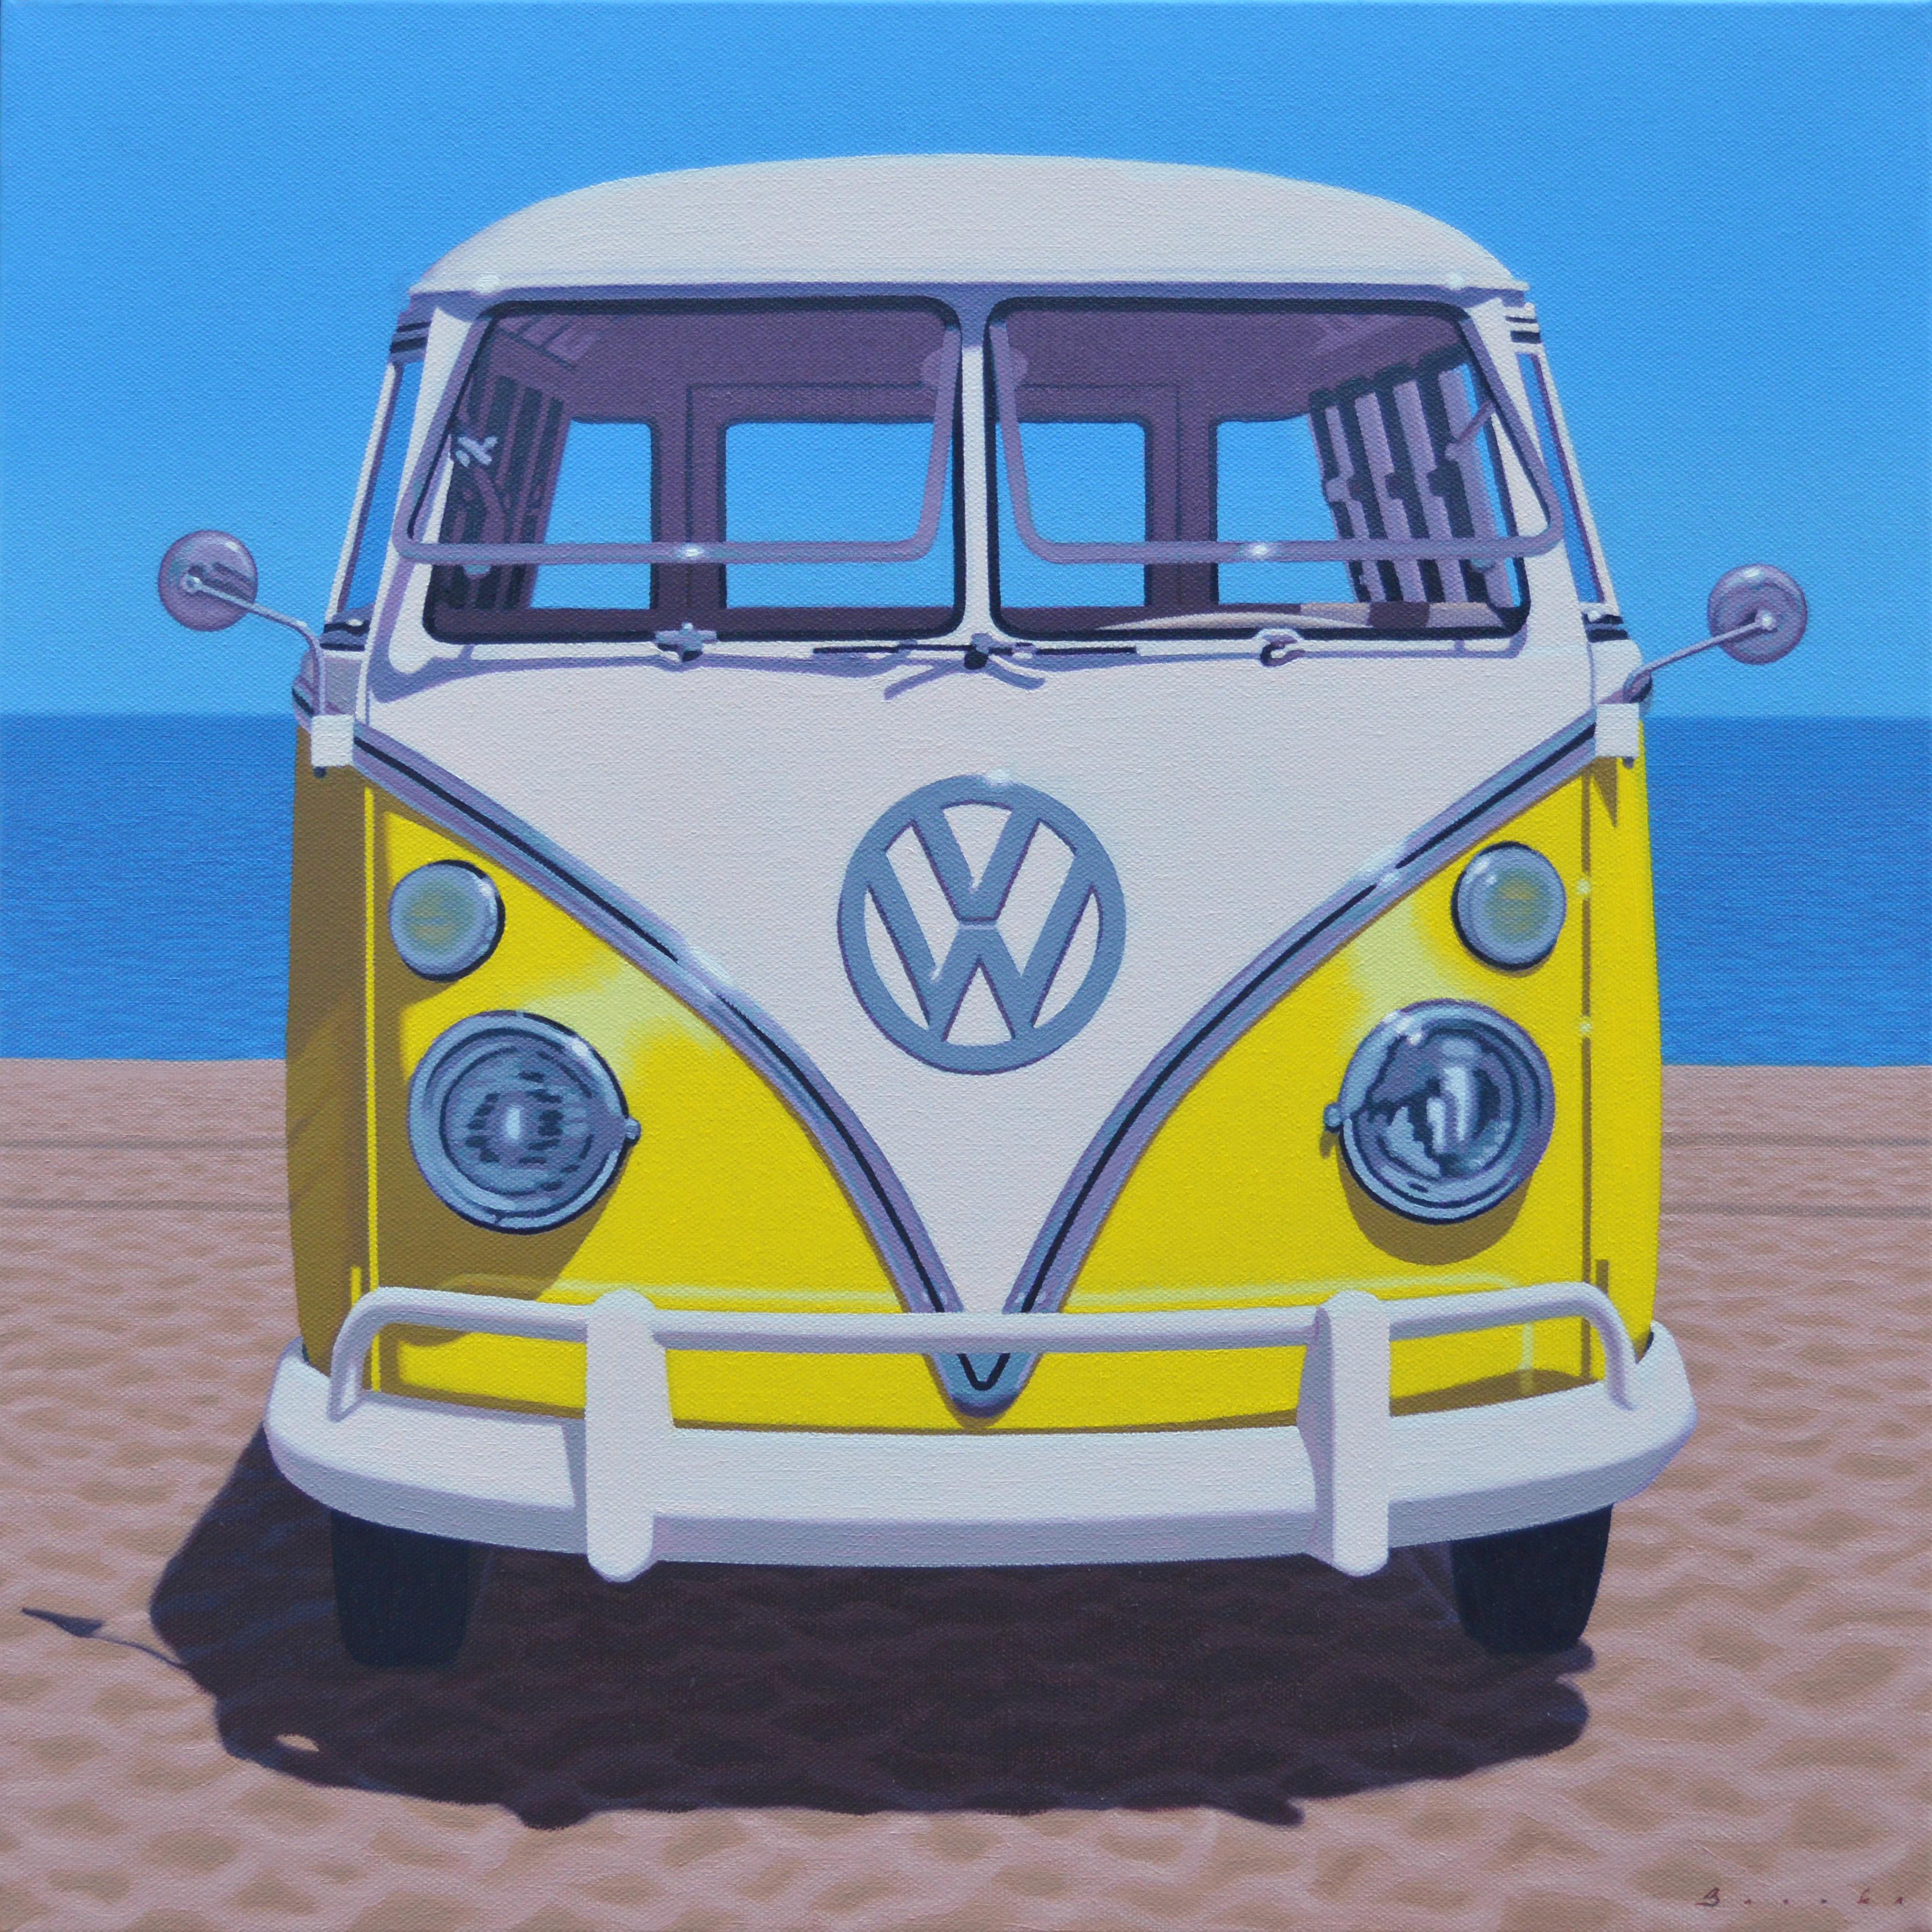 Rob Brooks Still-Life Painting - "Sunny Samba" Oil painting of a yellow vintage Volkswagen bus on the beach